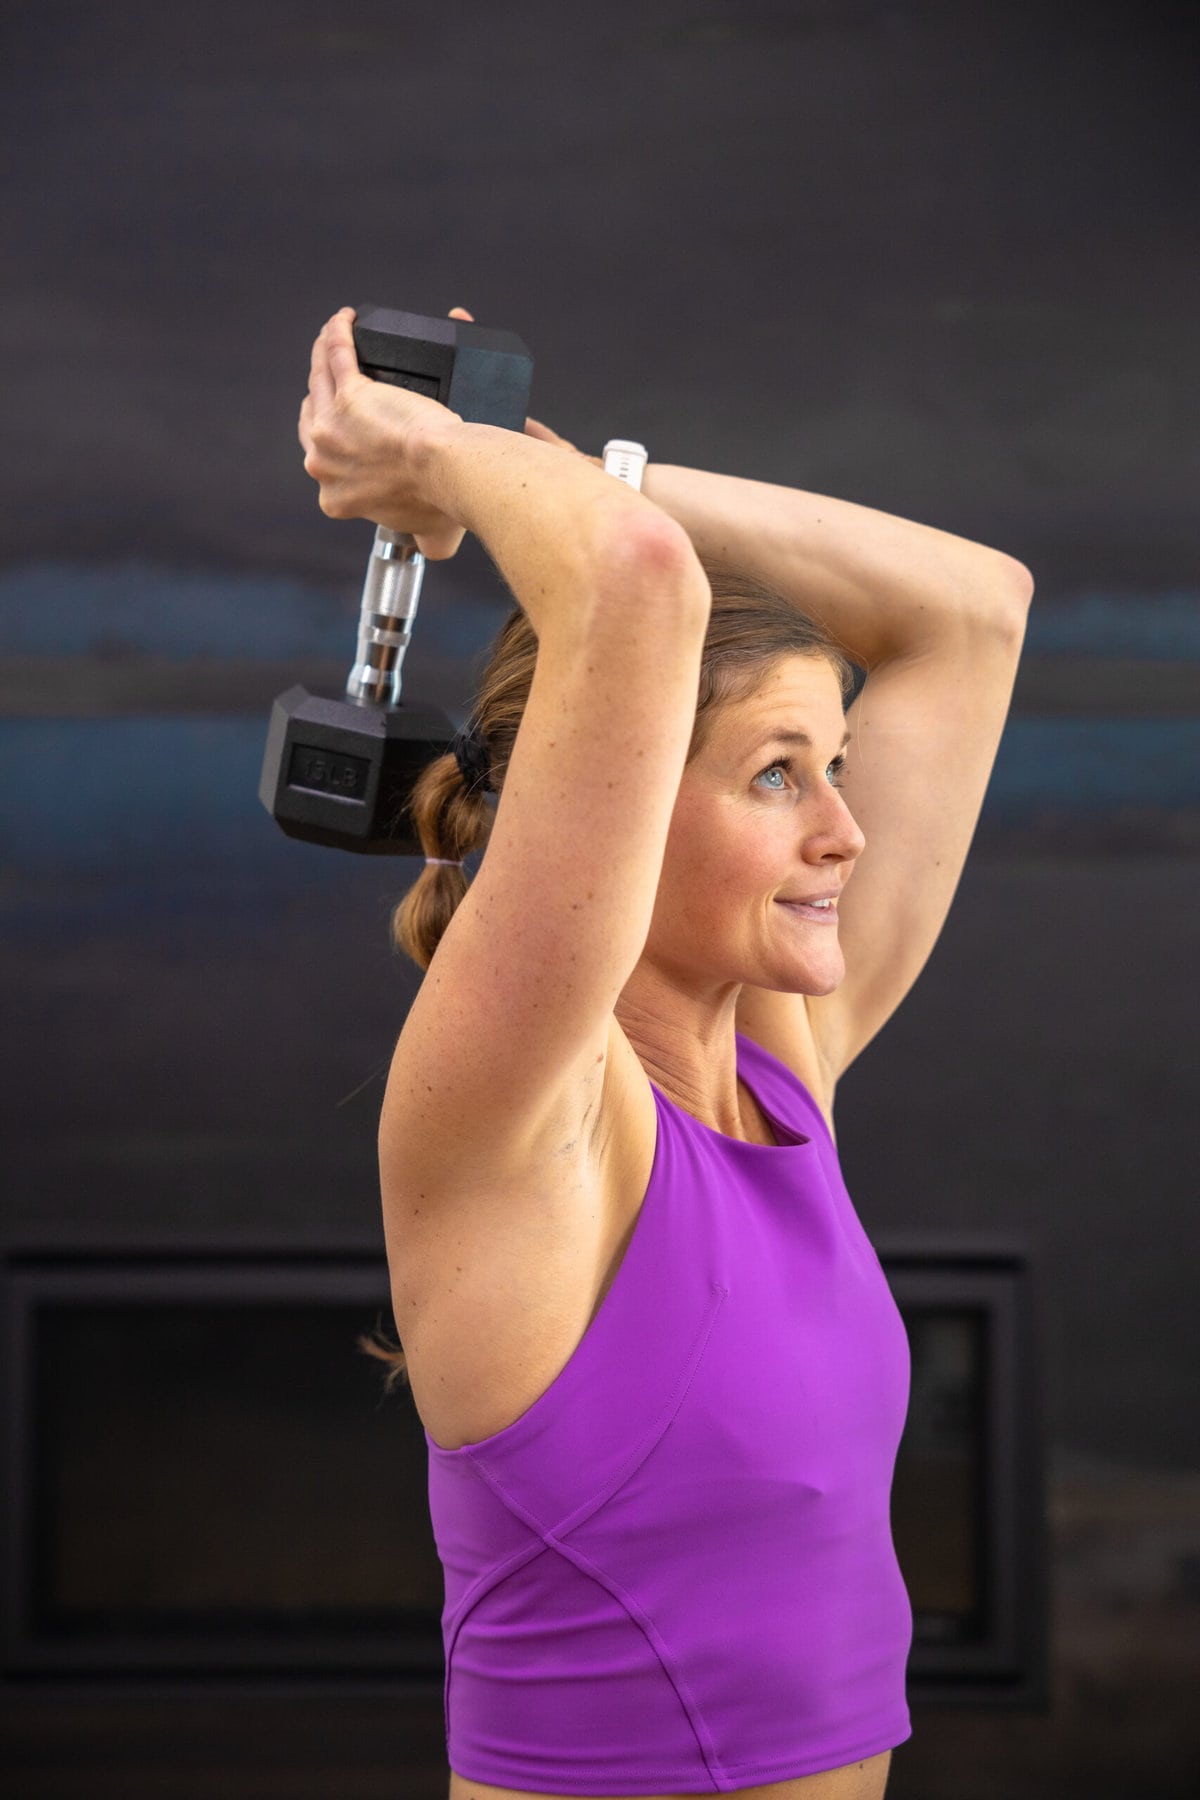 The Best 10-Minute Bicep Workout for Women, According to a Trainer